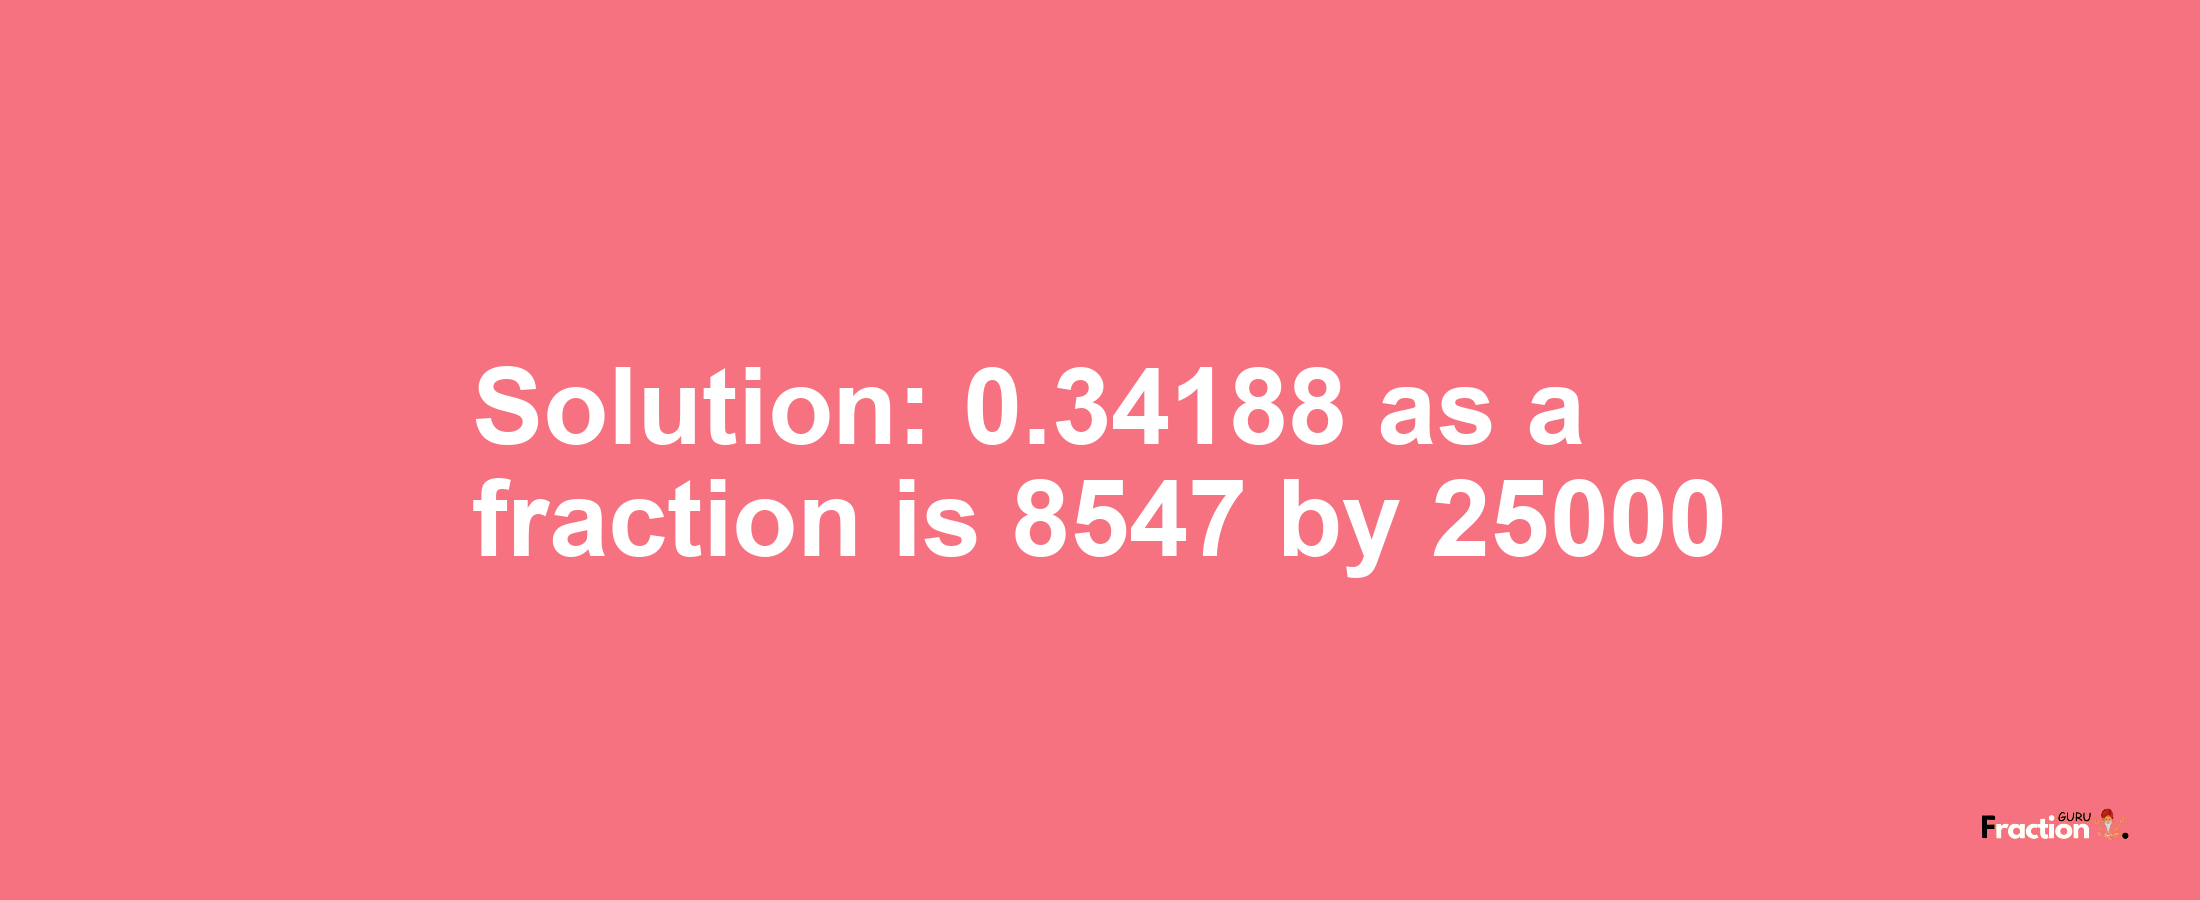 Solution:0.34188 as a fraction is 8547/25000